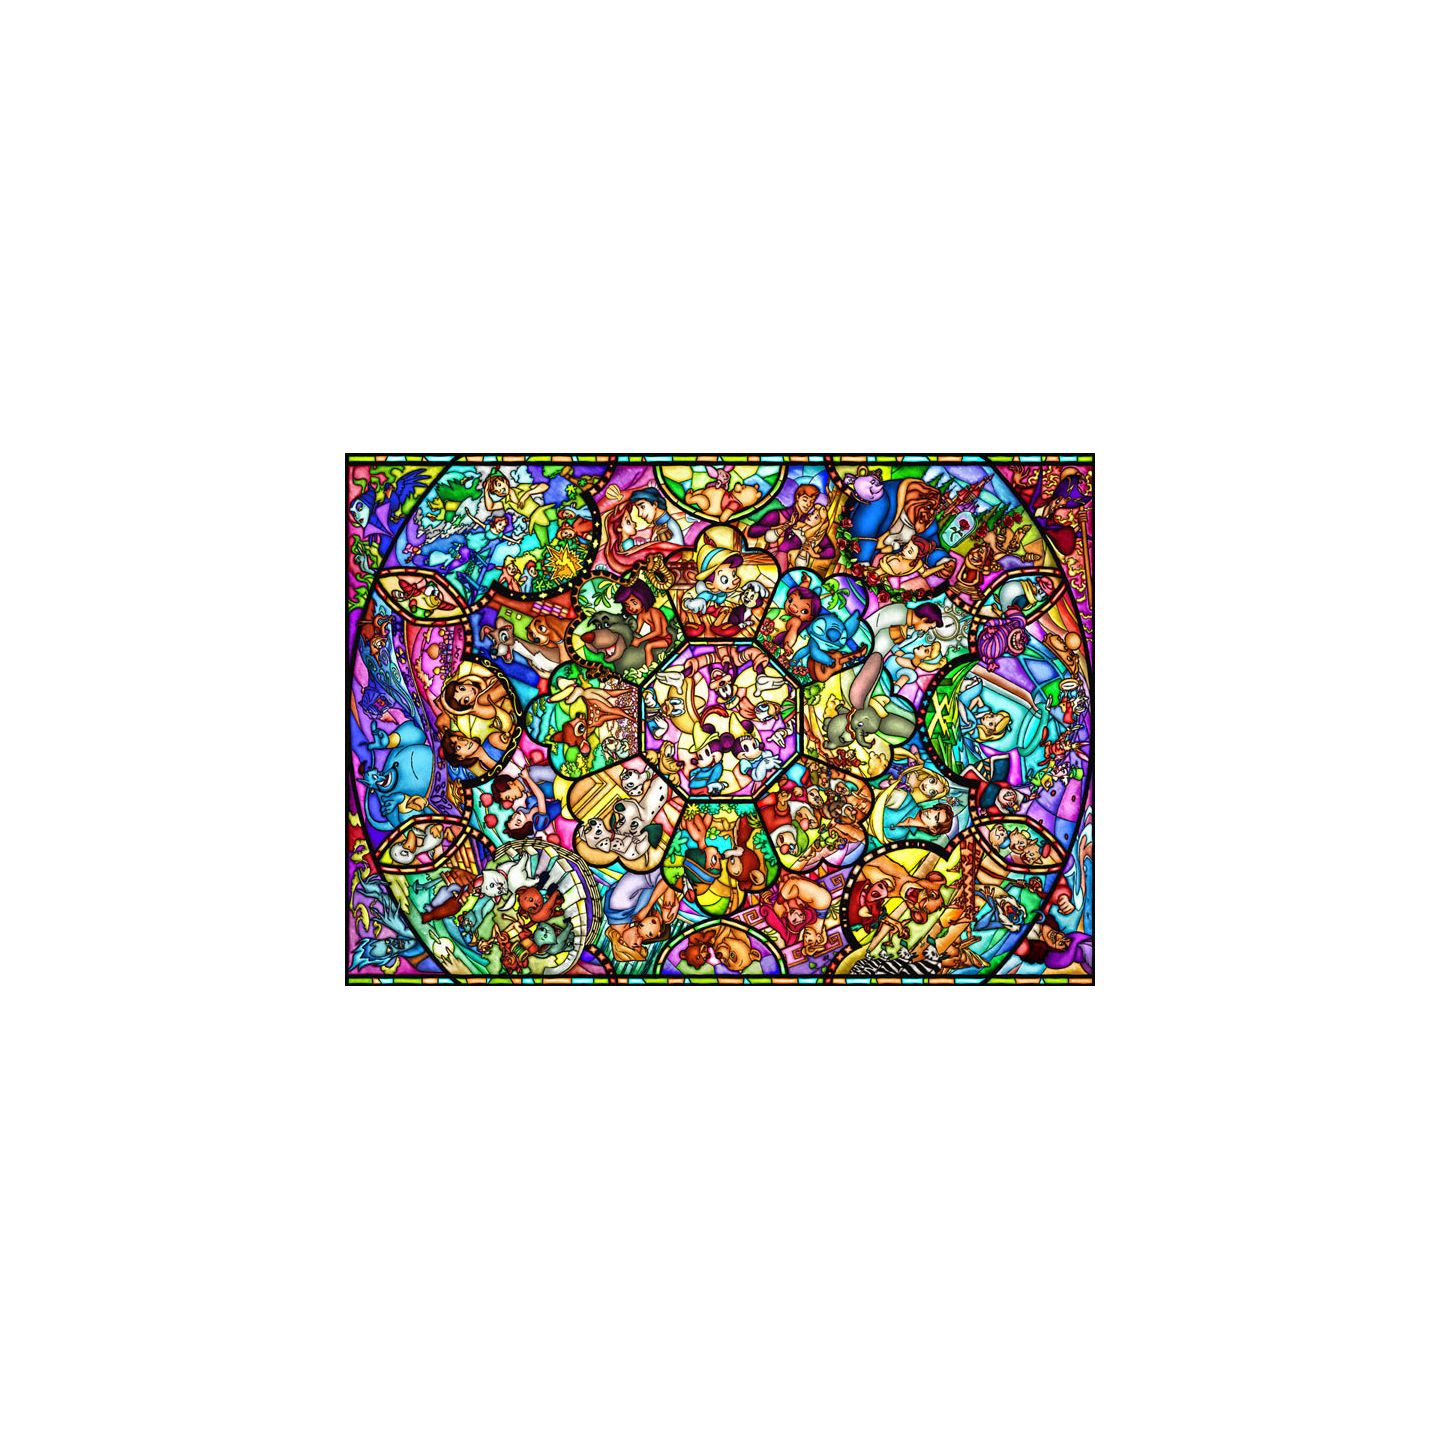 Tenyo Japan Jigsaw Puzzle D108-986 Glow in the